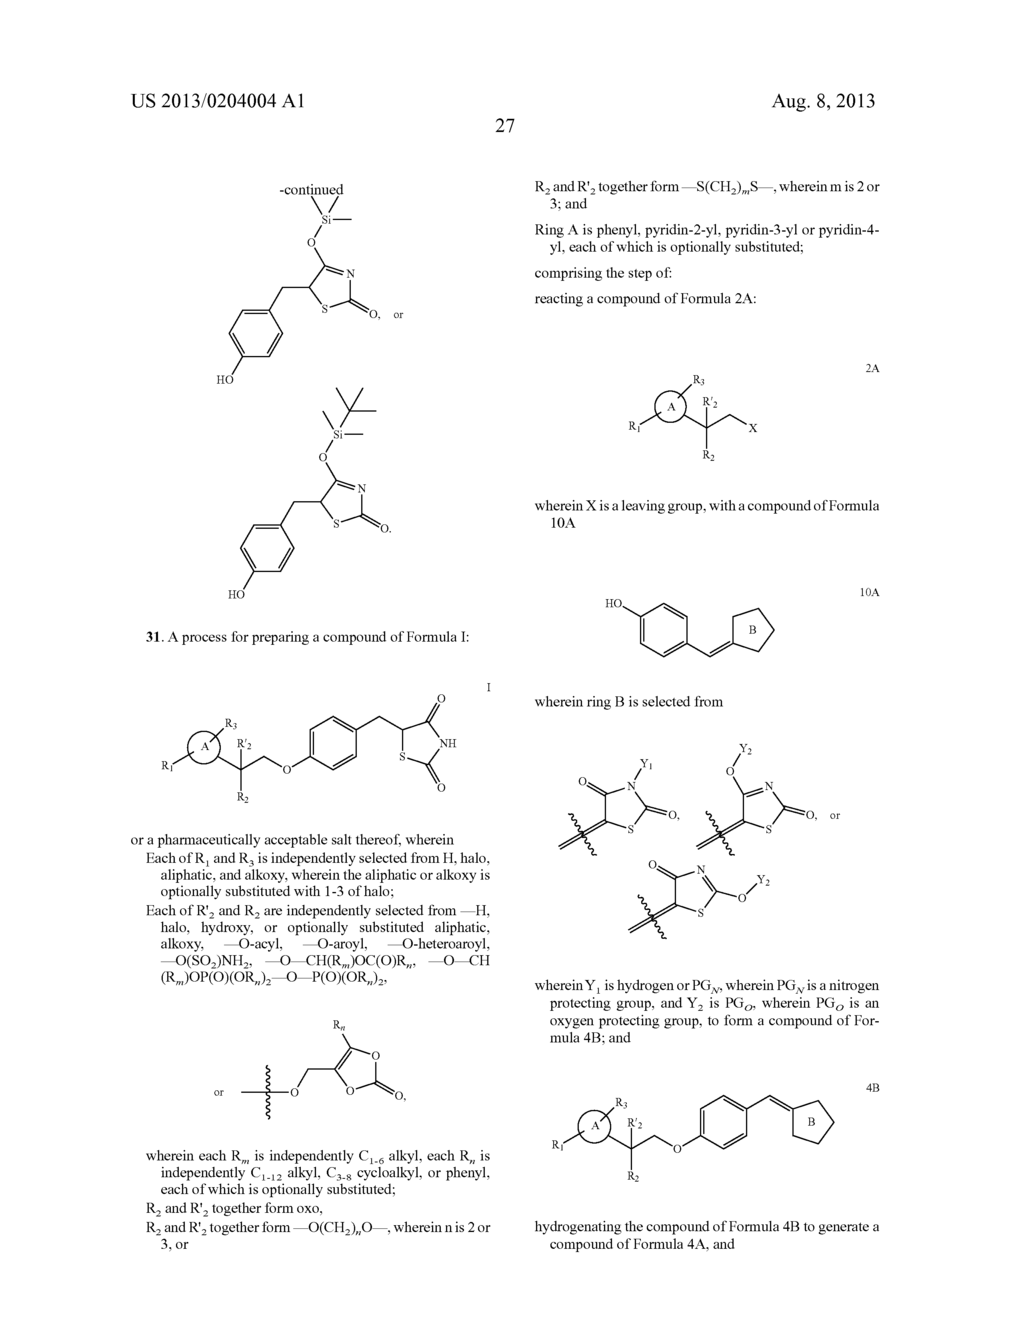 NOVEL SYNTHESIS FOR THIAZOLIDINEDIONE COMPOUNDS - diagram, schematic, and image 28